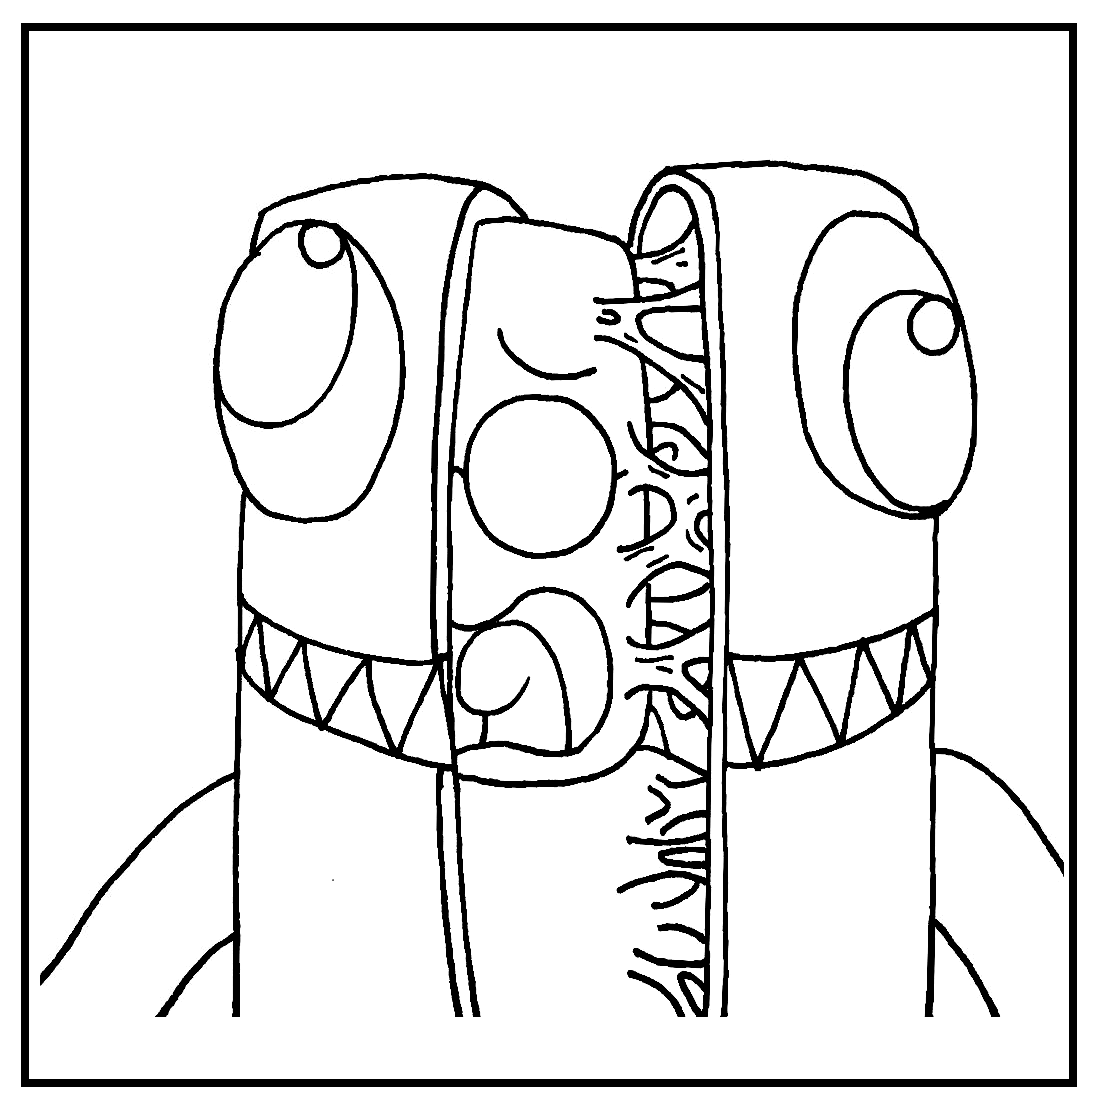 Rainbow Friends Green Roblox Coloring Pages - Free Printable Coloring Pages